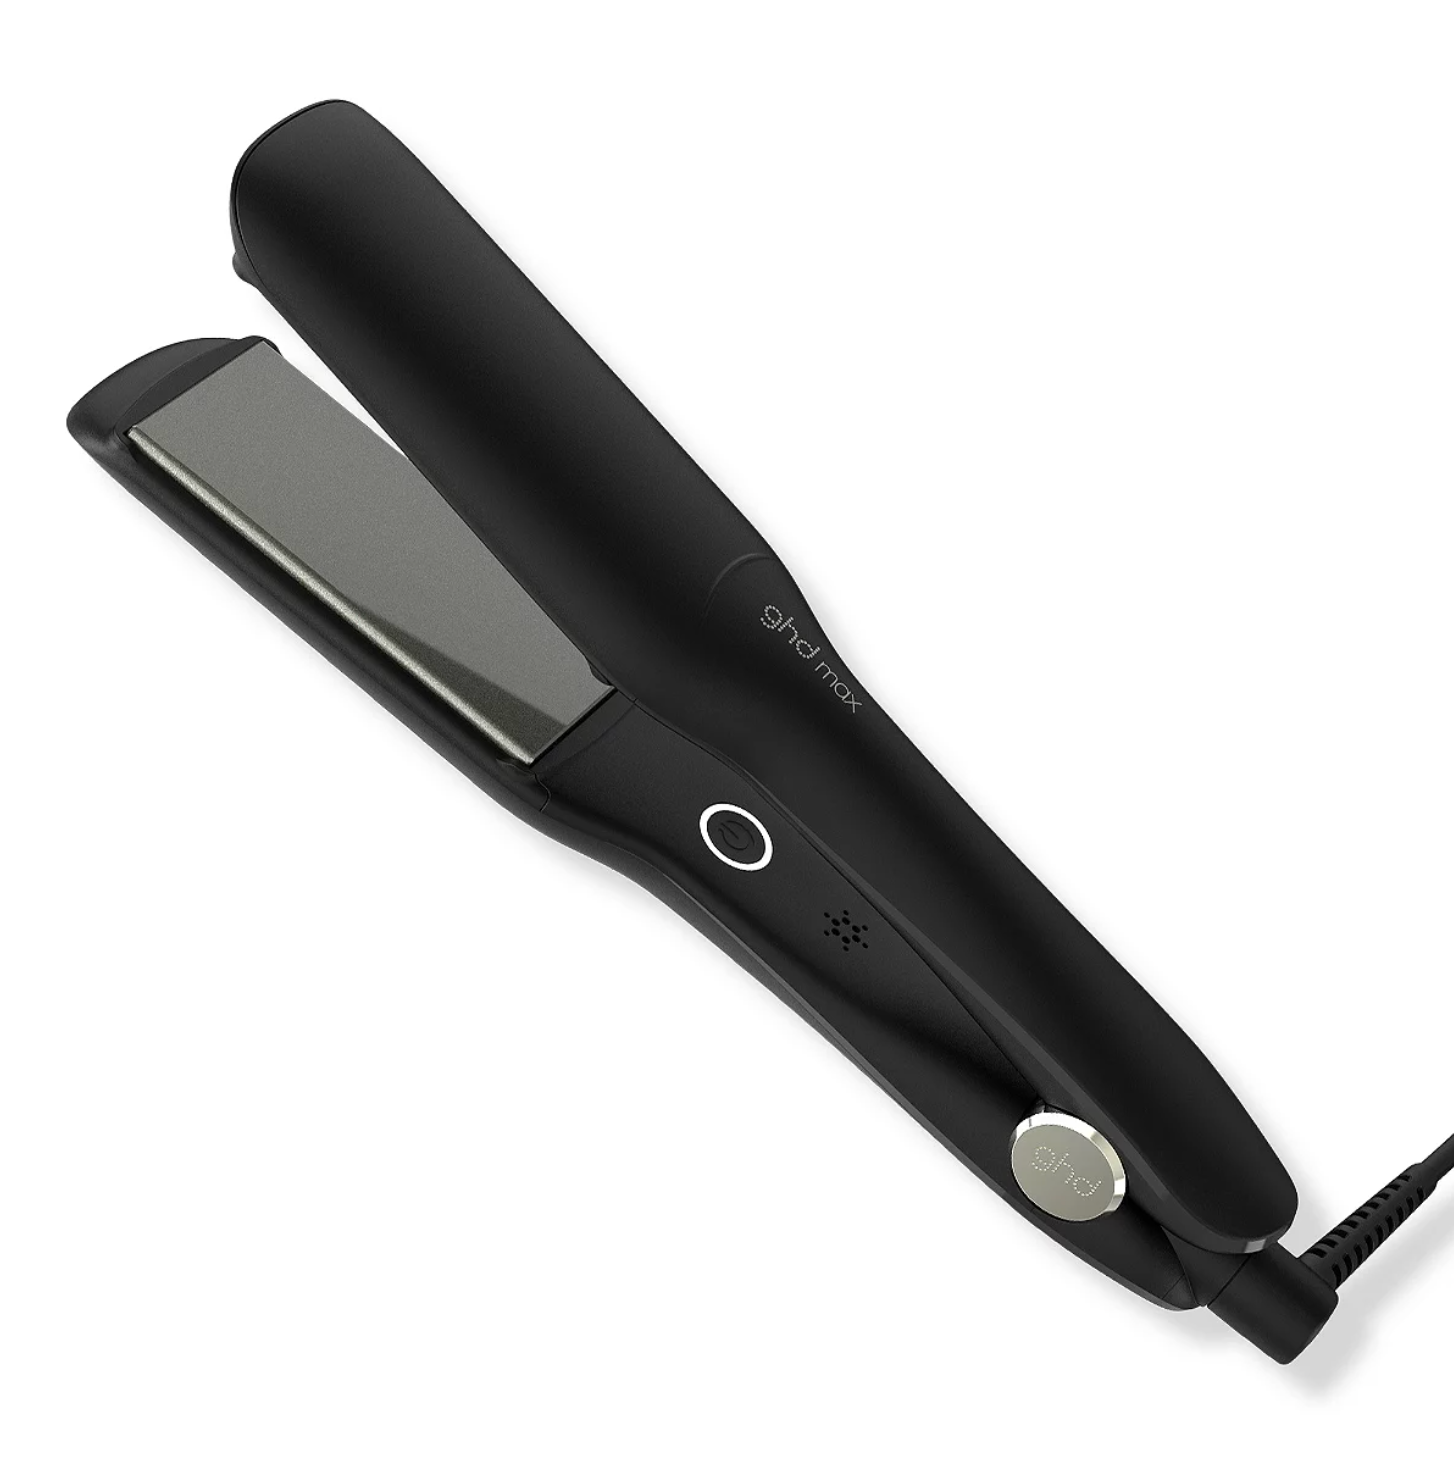 16 Best Hair Straighteners For Really Thick Hair 2022